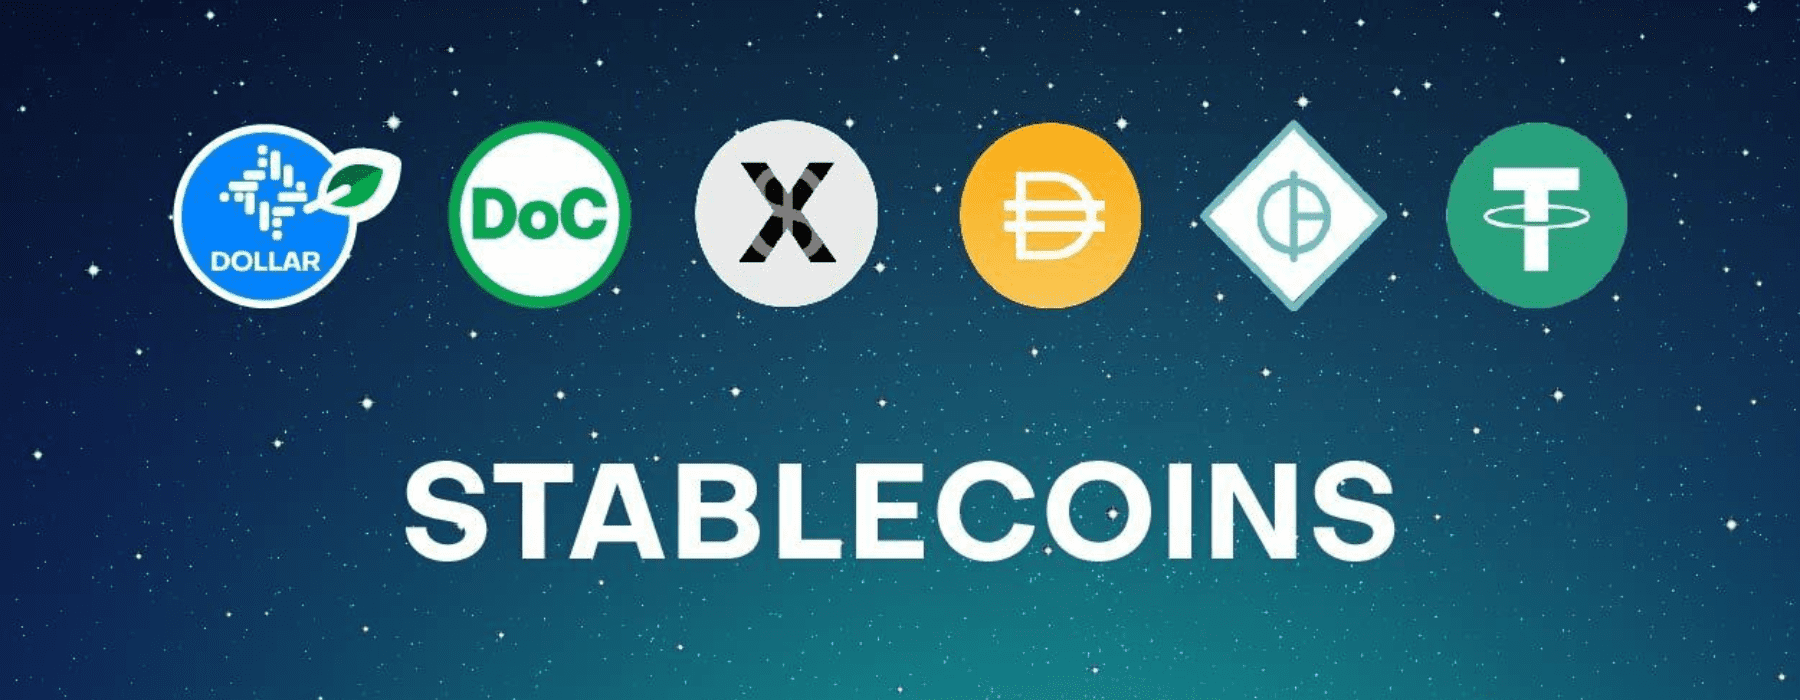 Is Stablecoin Decentralized